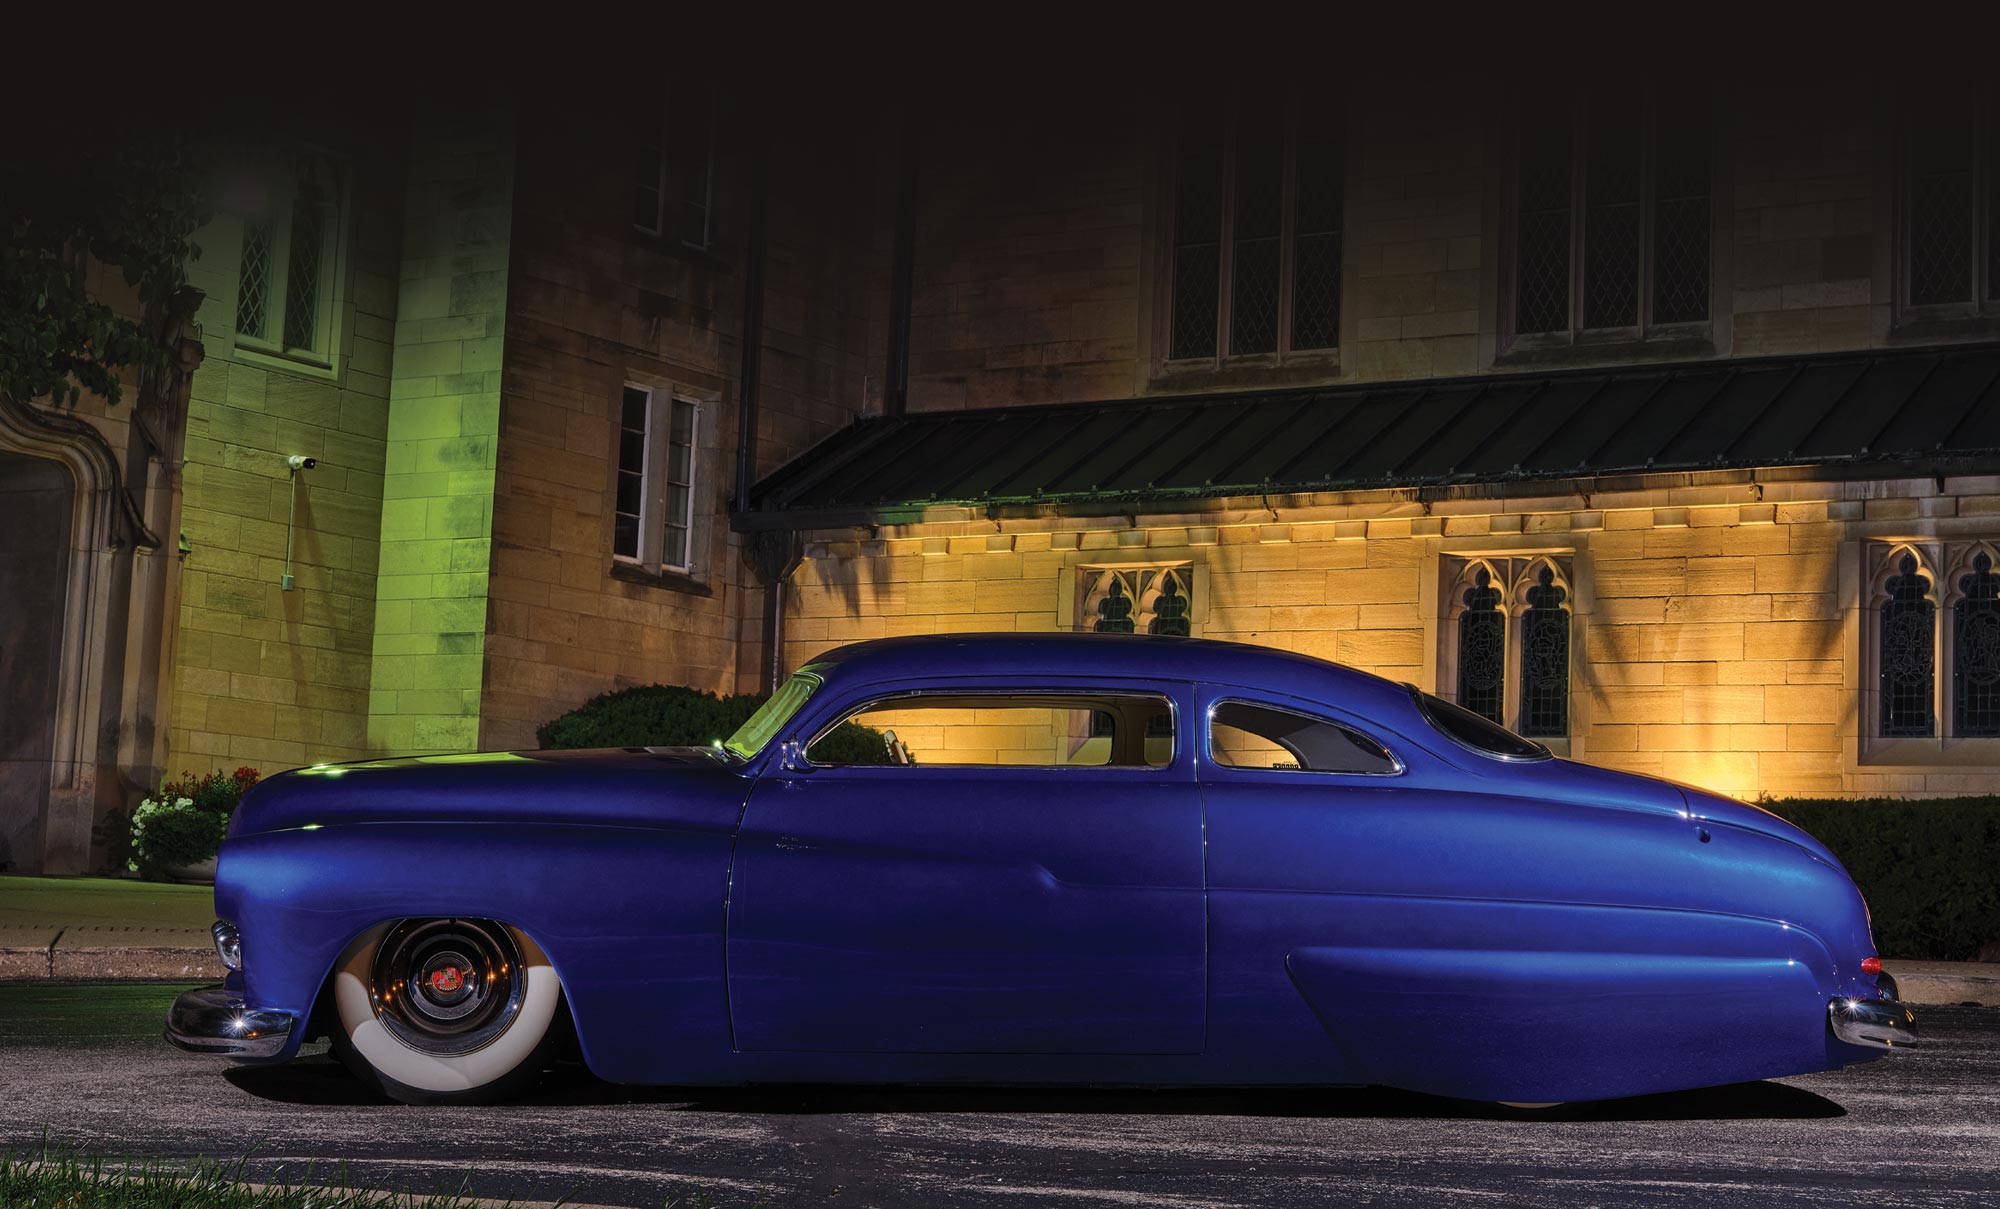 Driver's side profile view of the '50 Merc in Candy Cobalt blue, parked in front of a old stone building at night